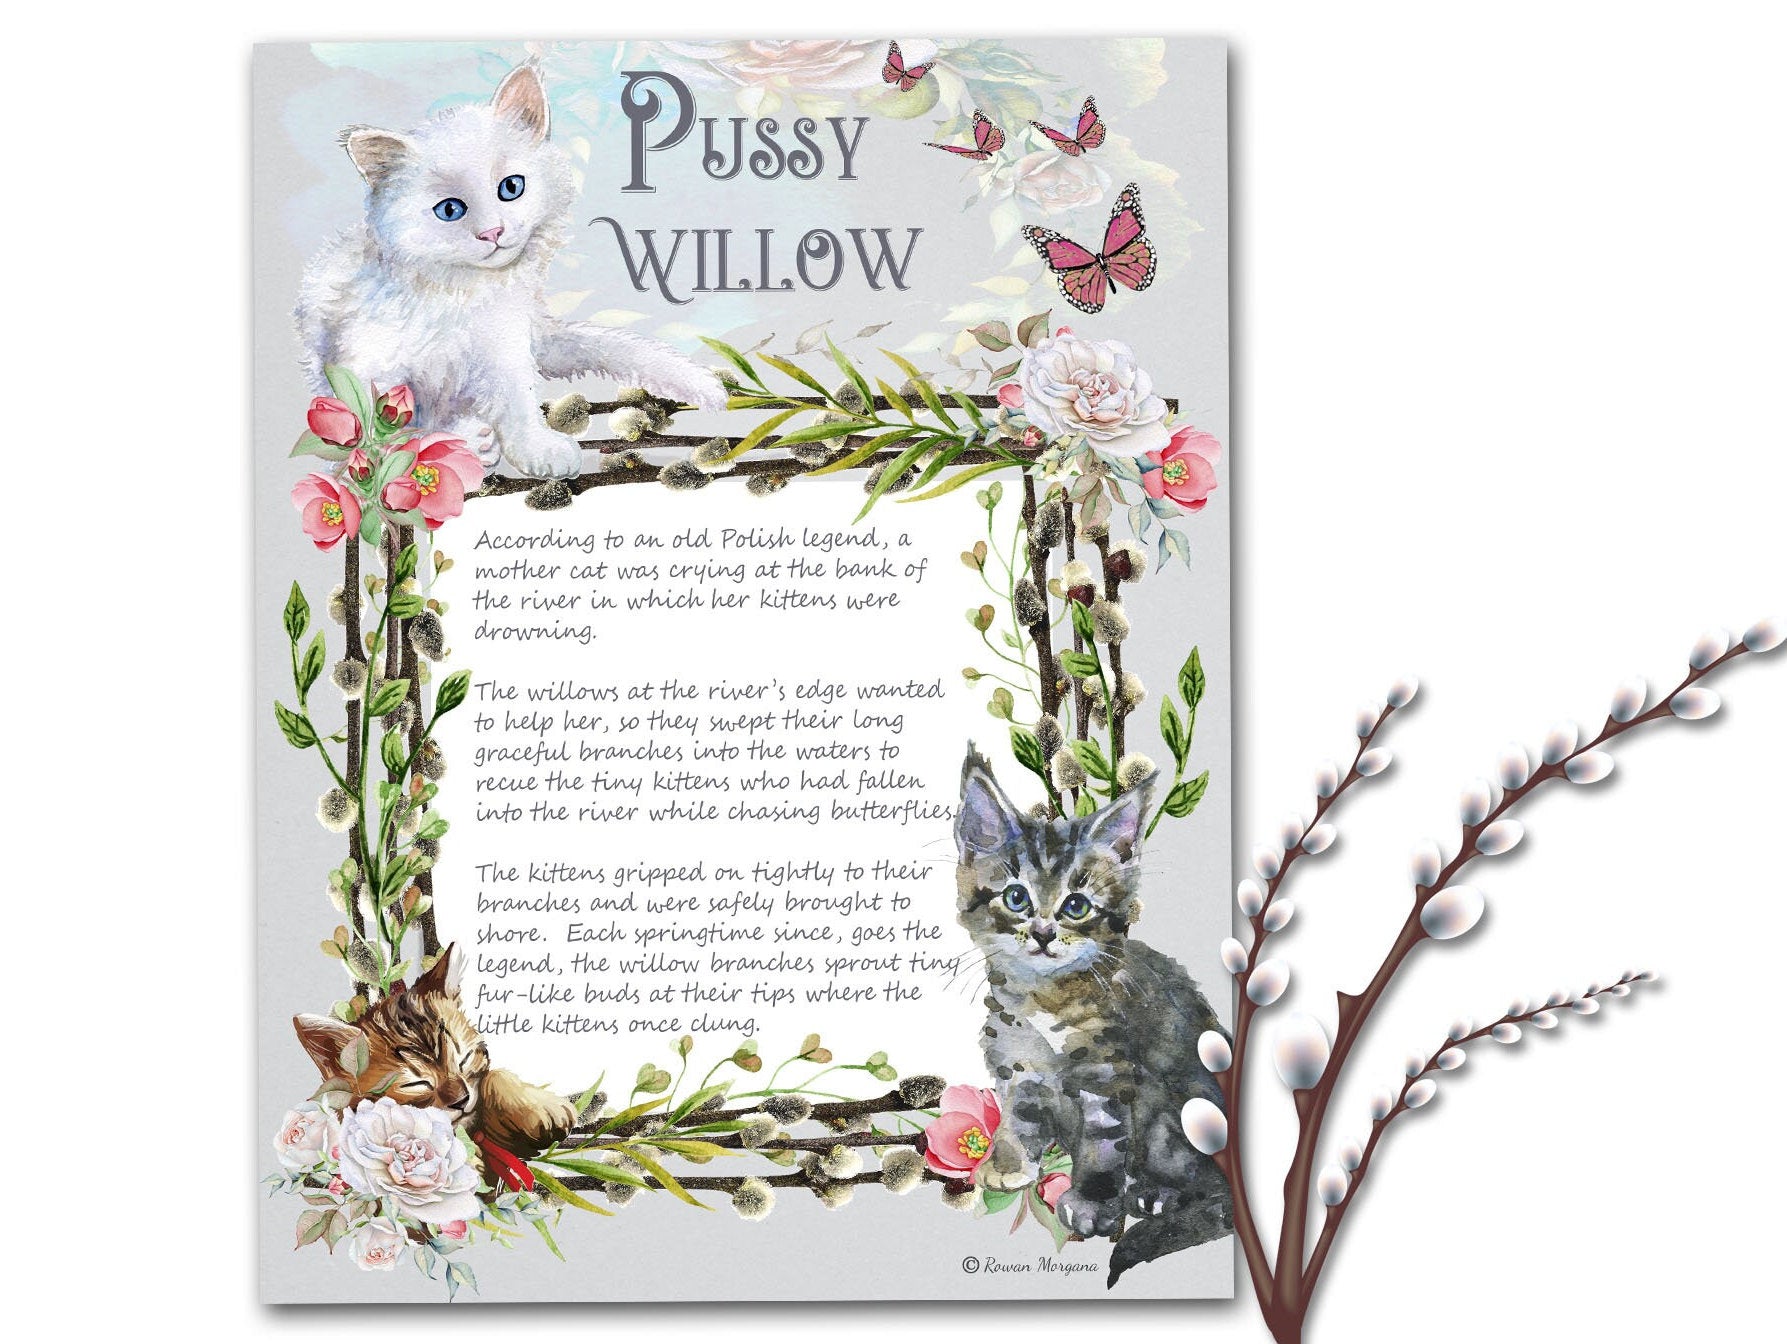 PUSSY WILLOW, Printable Grimoire Page, lovely folktale legend about pussy willow catkins, suitable for all ages, a great childrens gift - Morgana Magick Spell